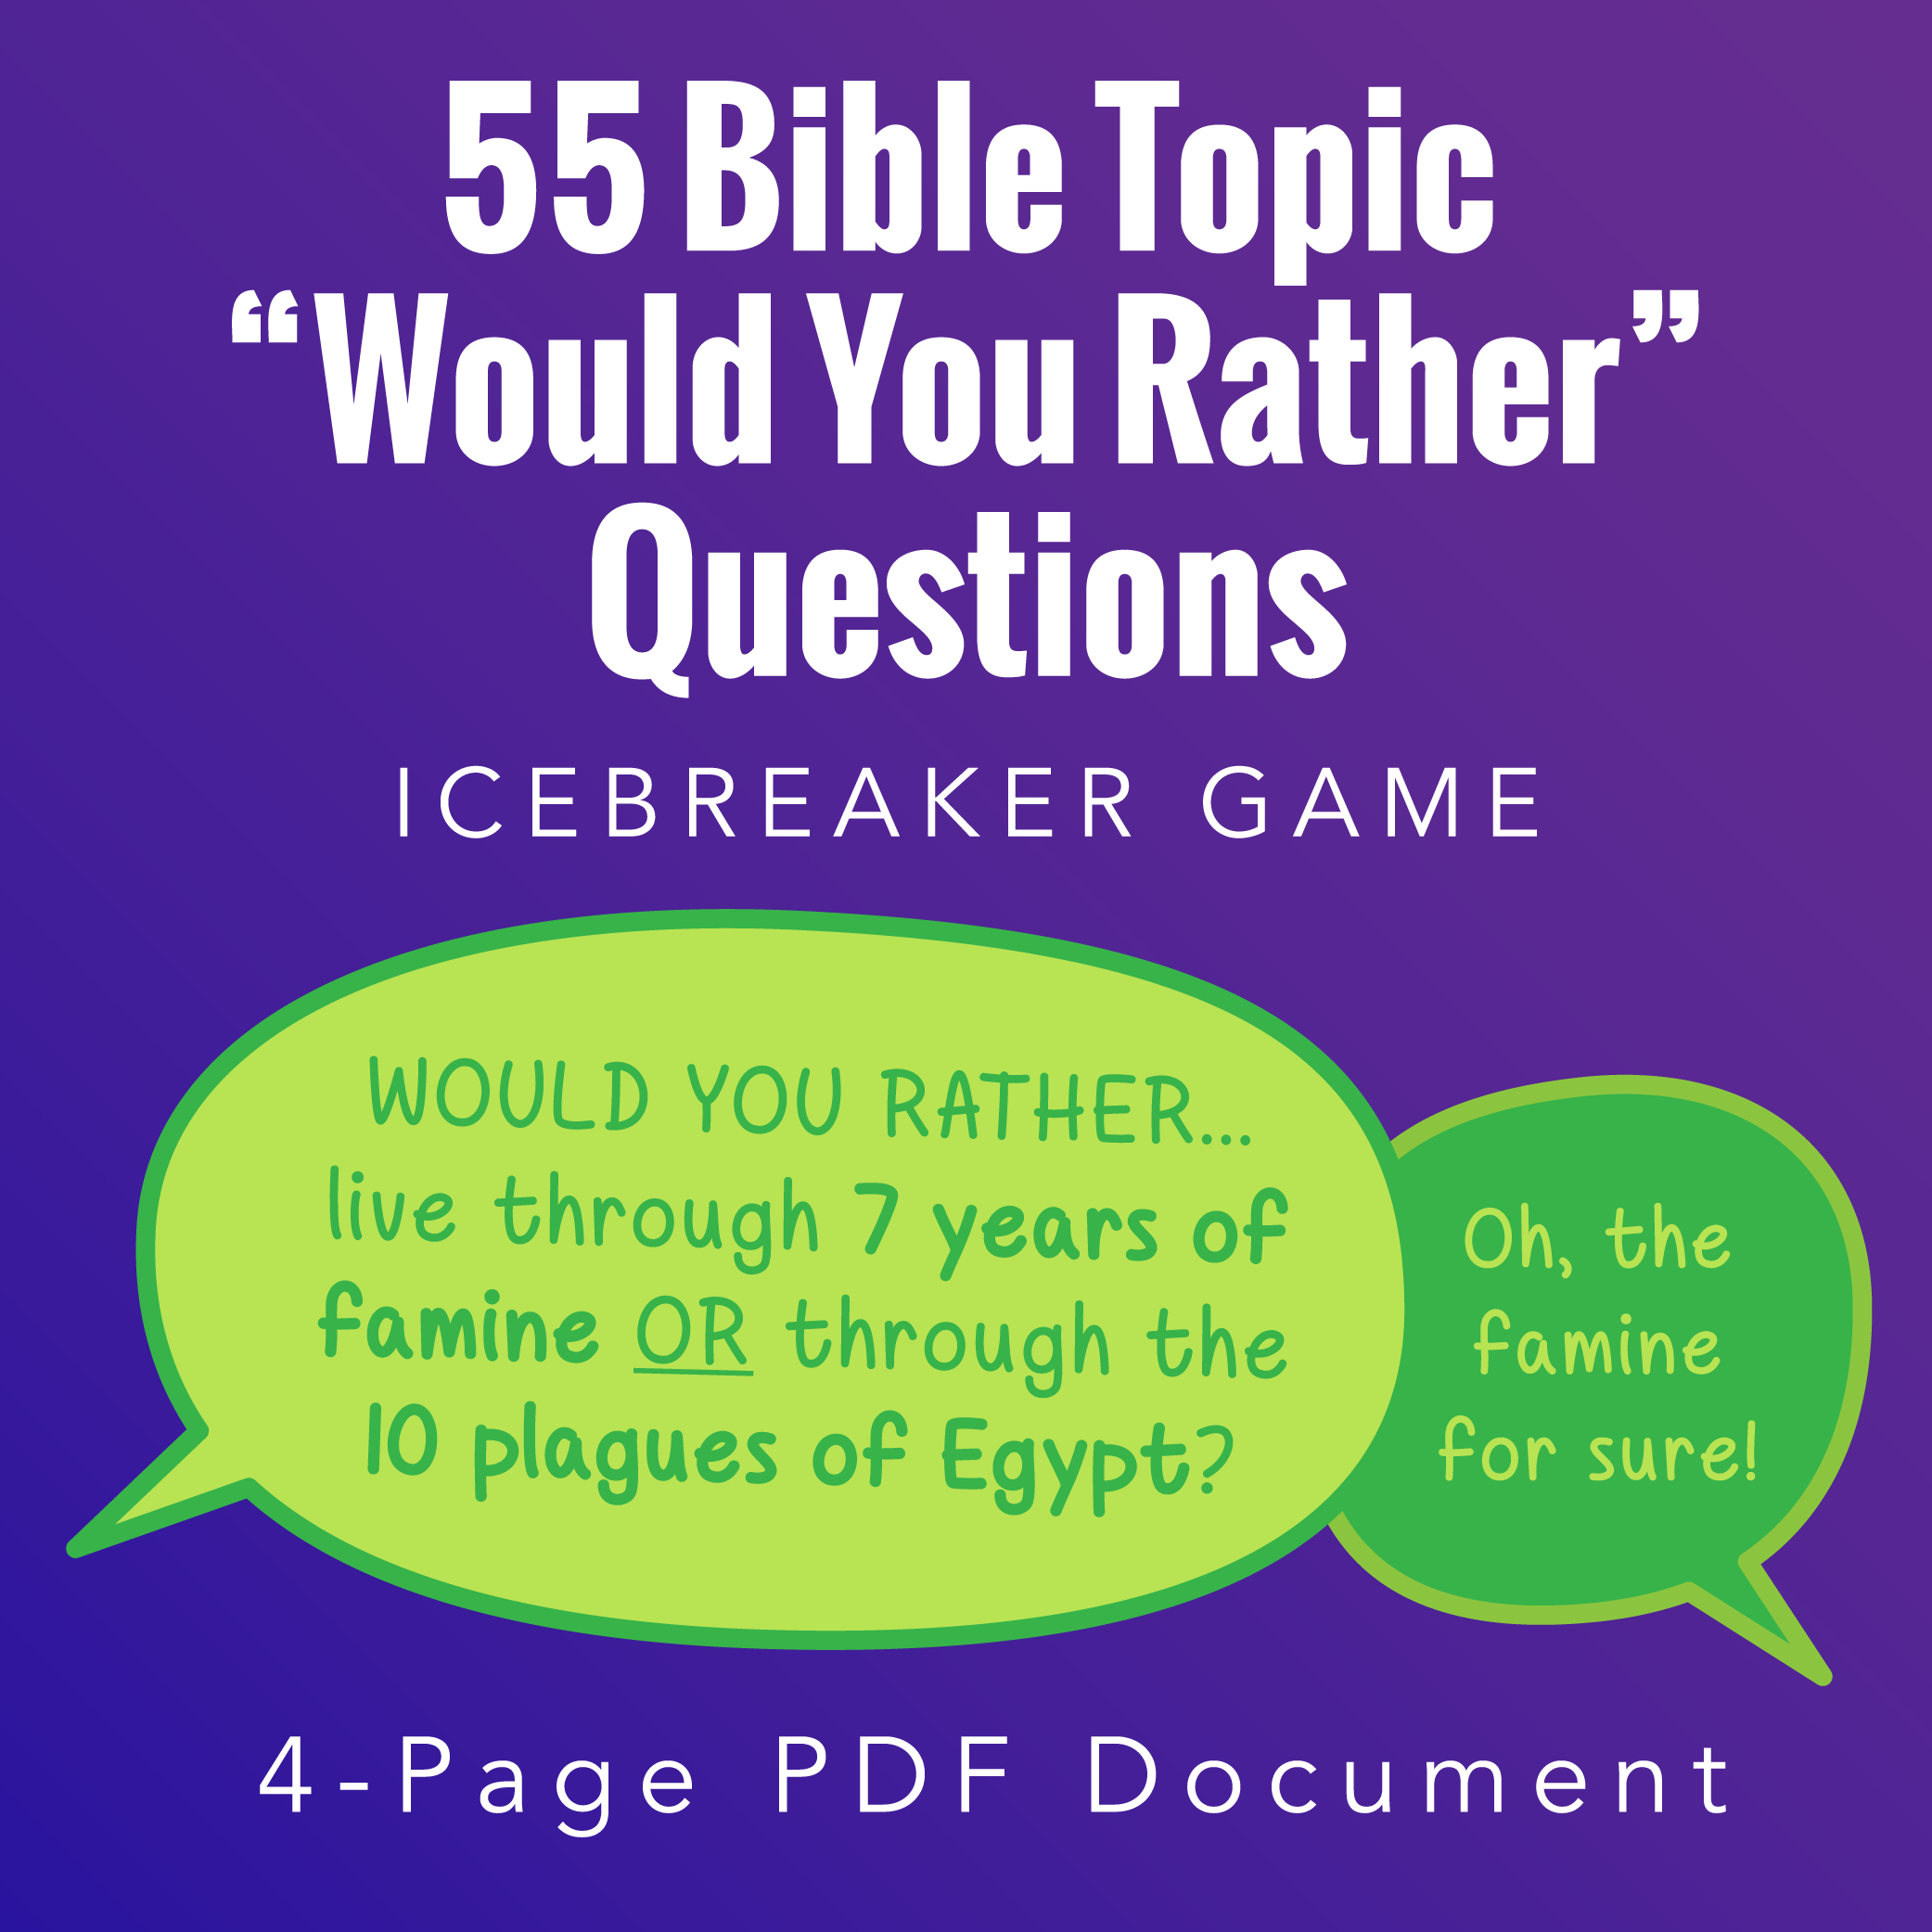 55 Bible Topic Would You Rather Questions - Icebreaker Game